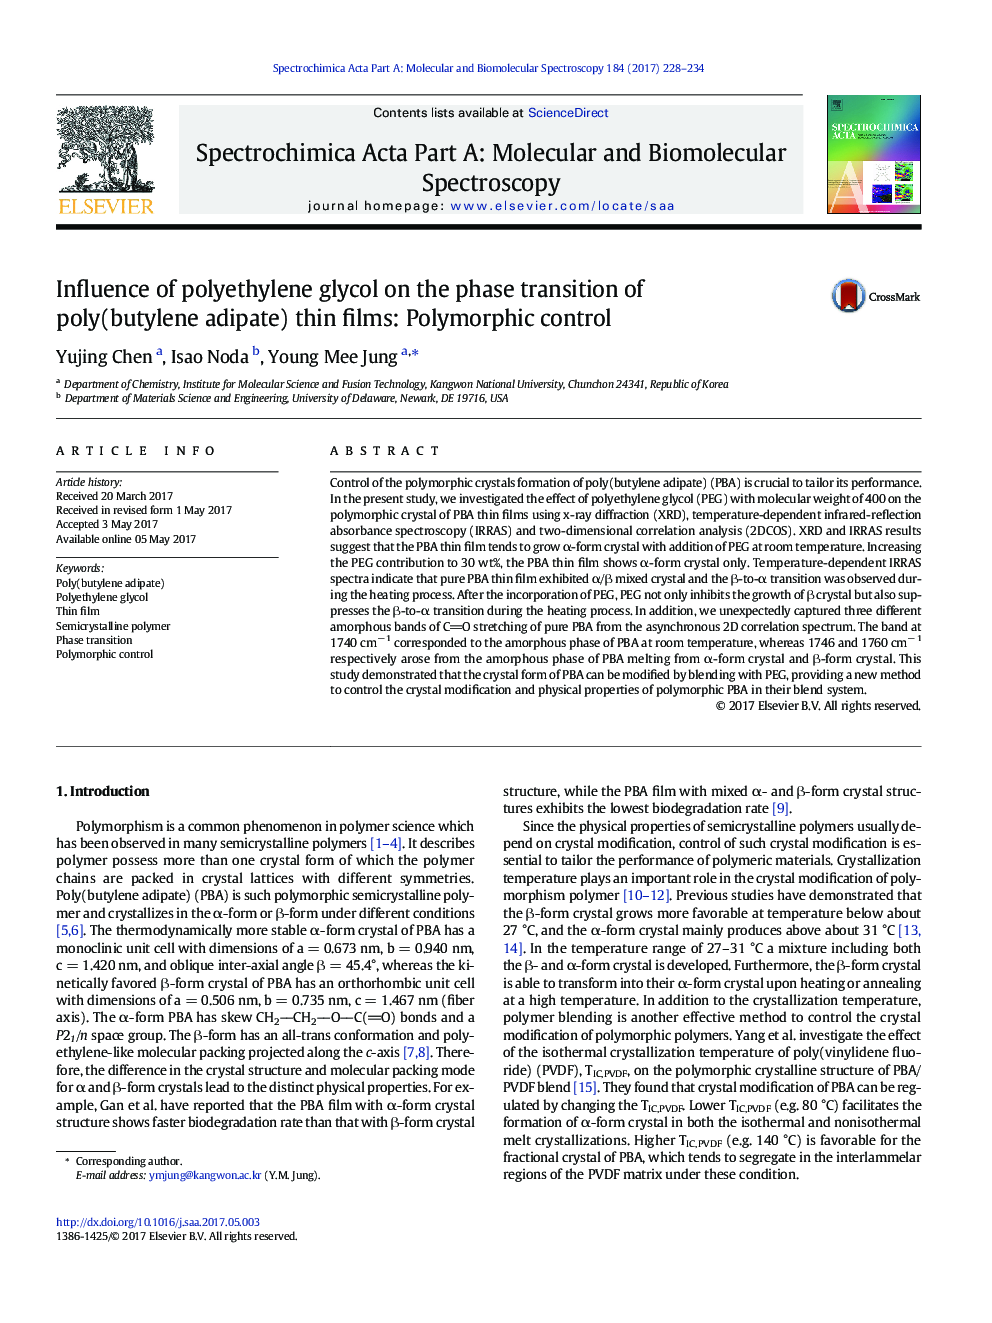 Influence of polyethylene glycol on the phase transition of poly(butylene adipate) thin films: Polymorphic control